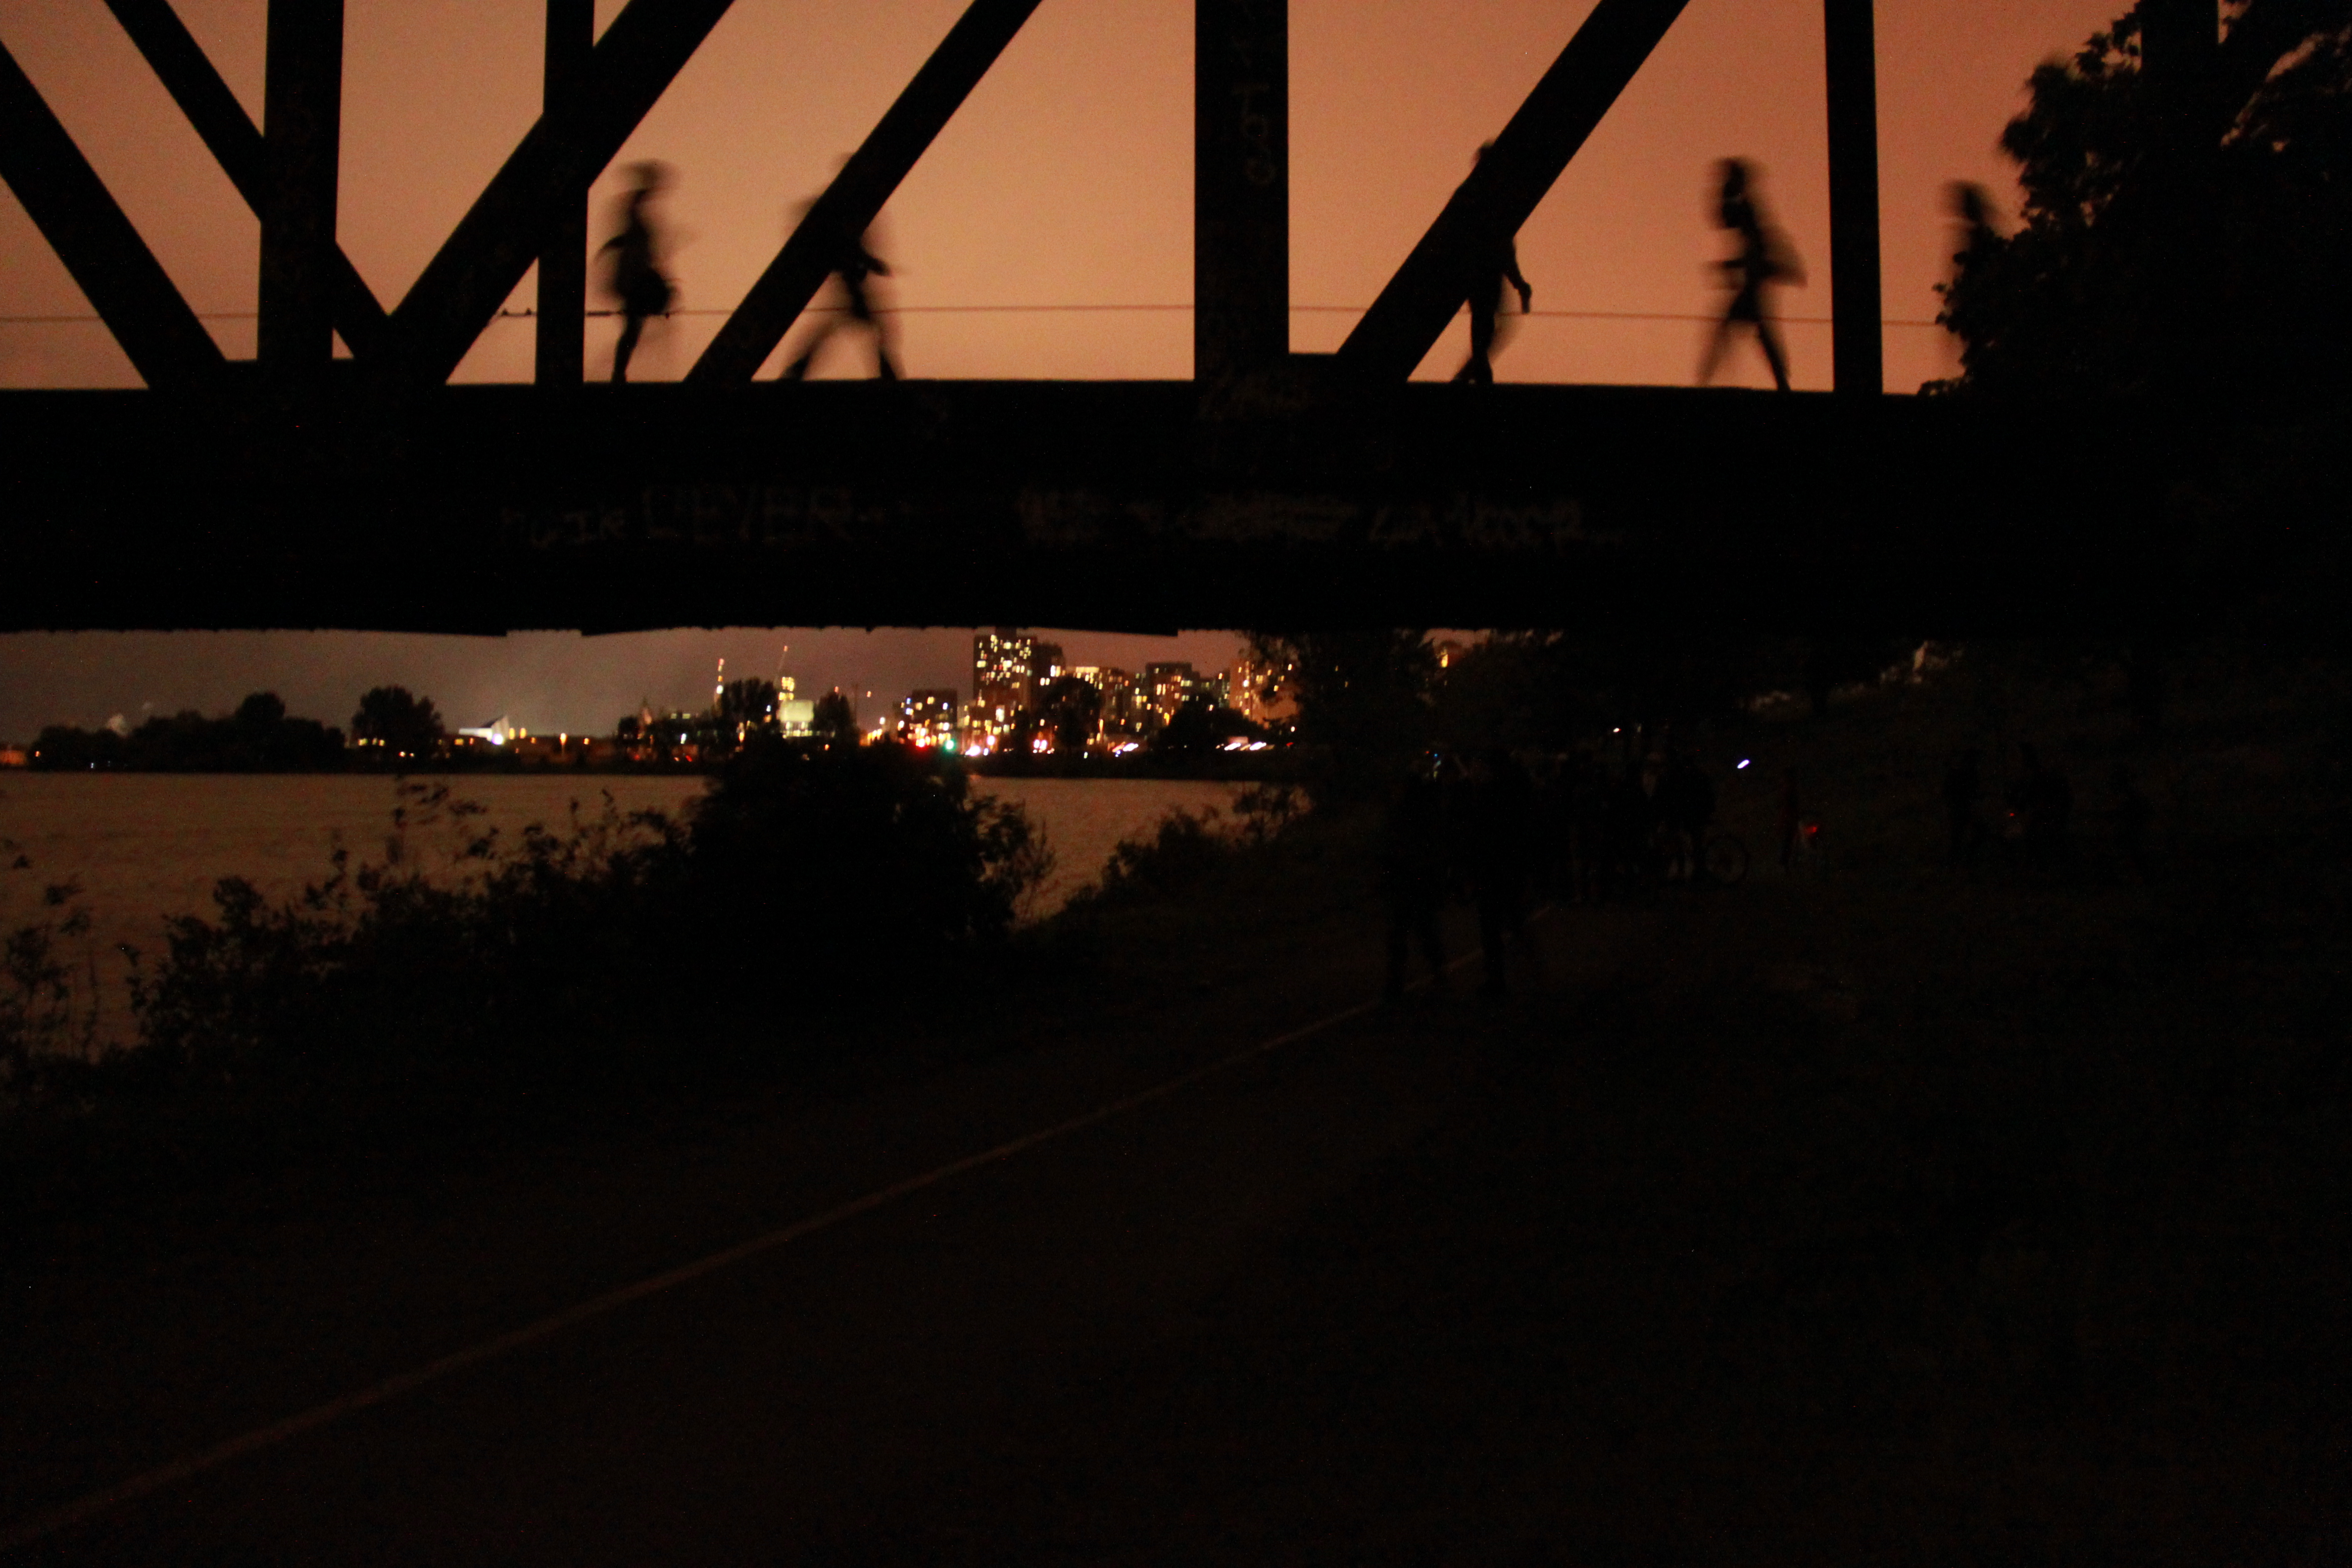 Heading home after the Canada day fireworks by the Prince of Whales bridge in Ottawa, Ontario.